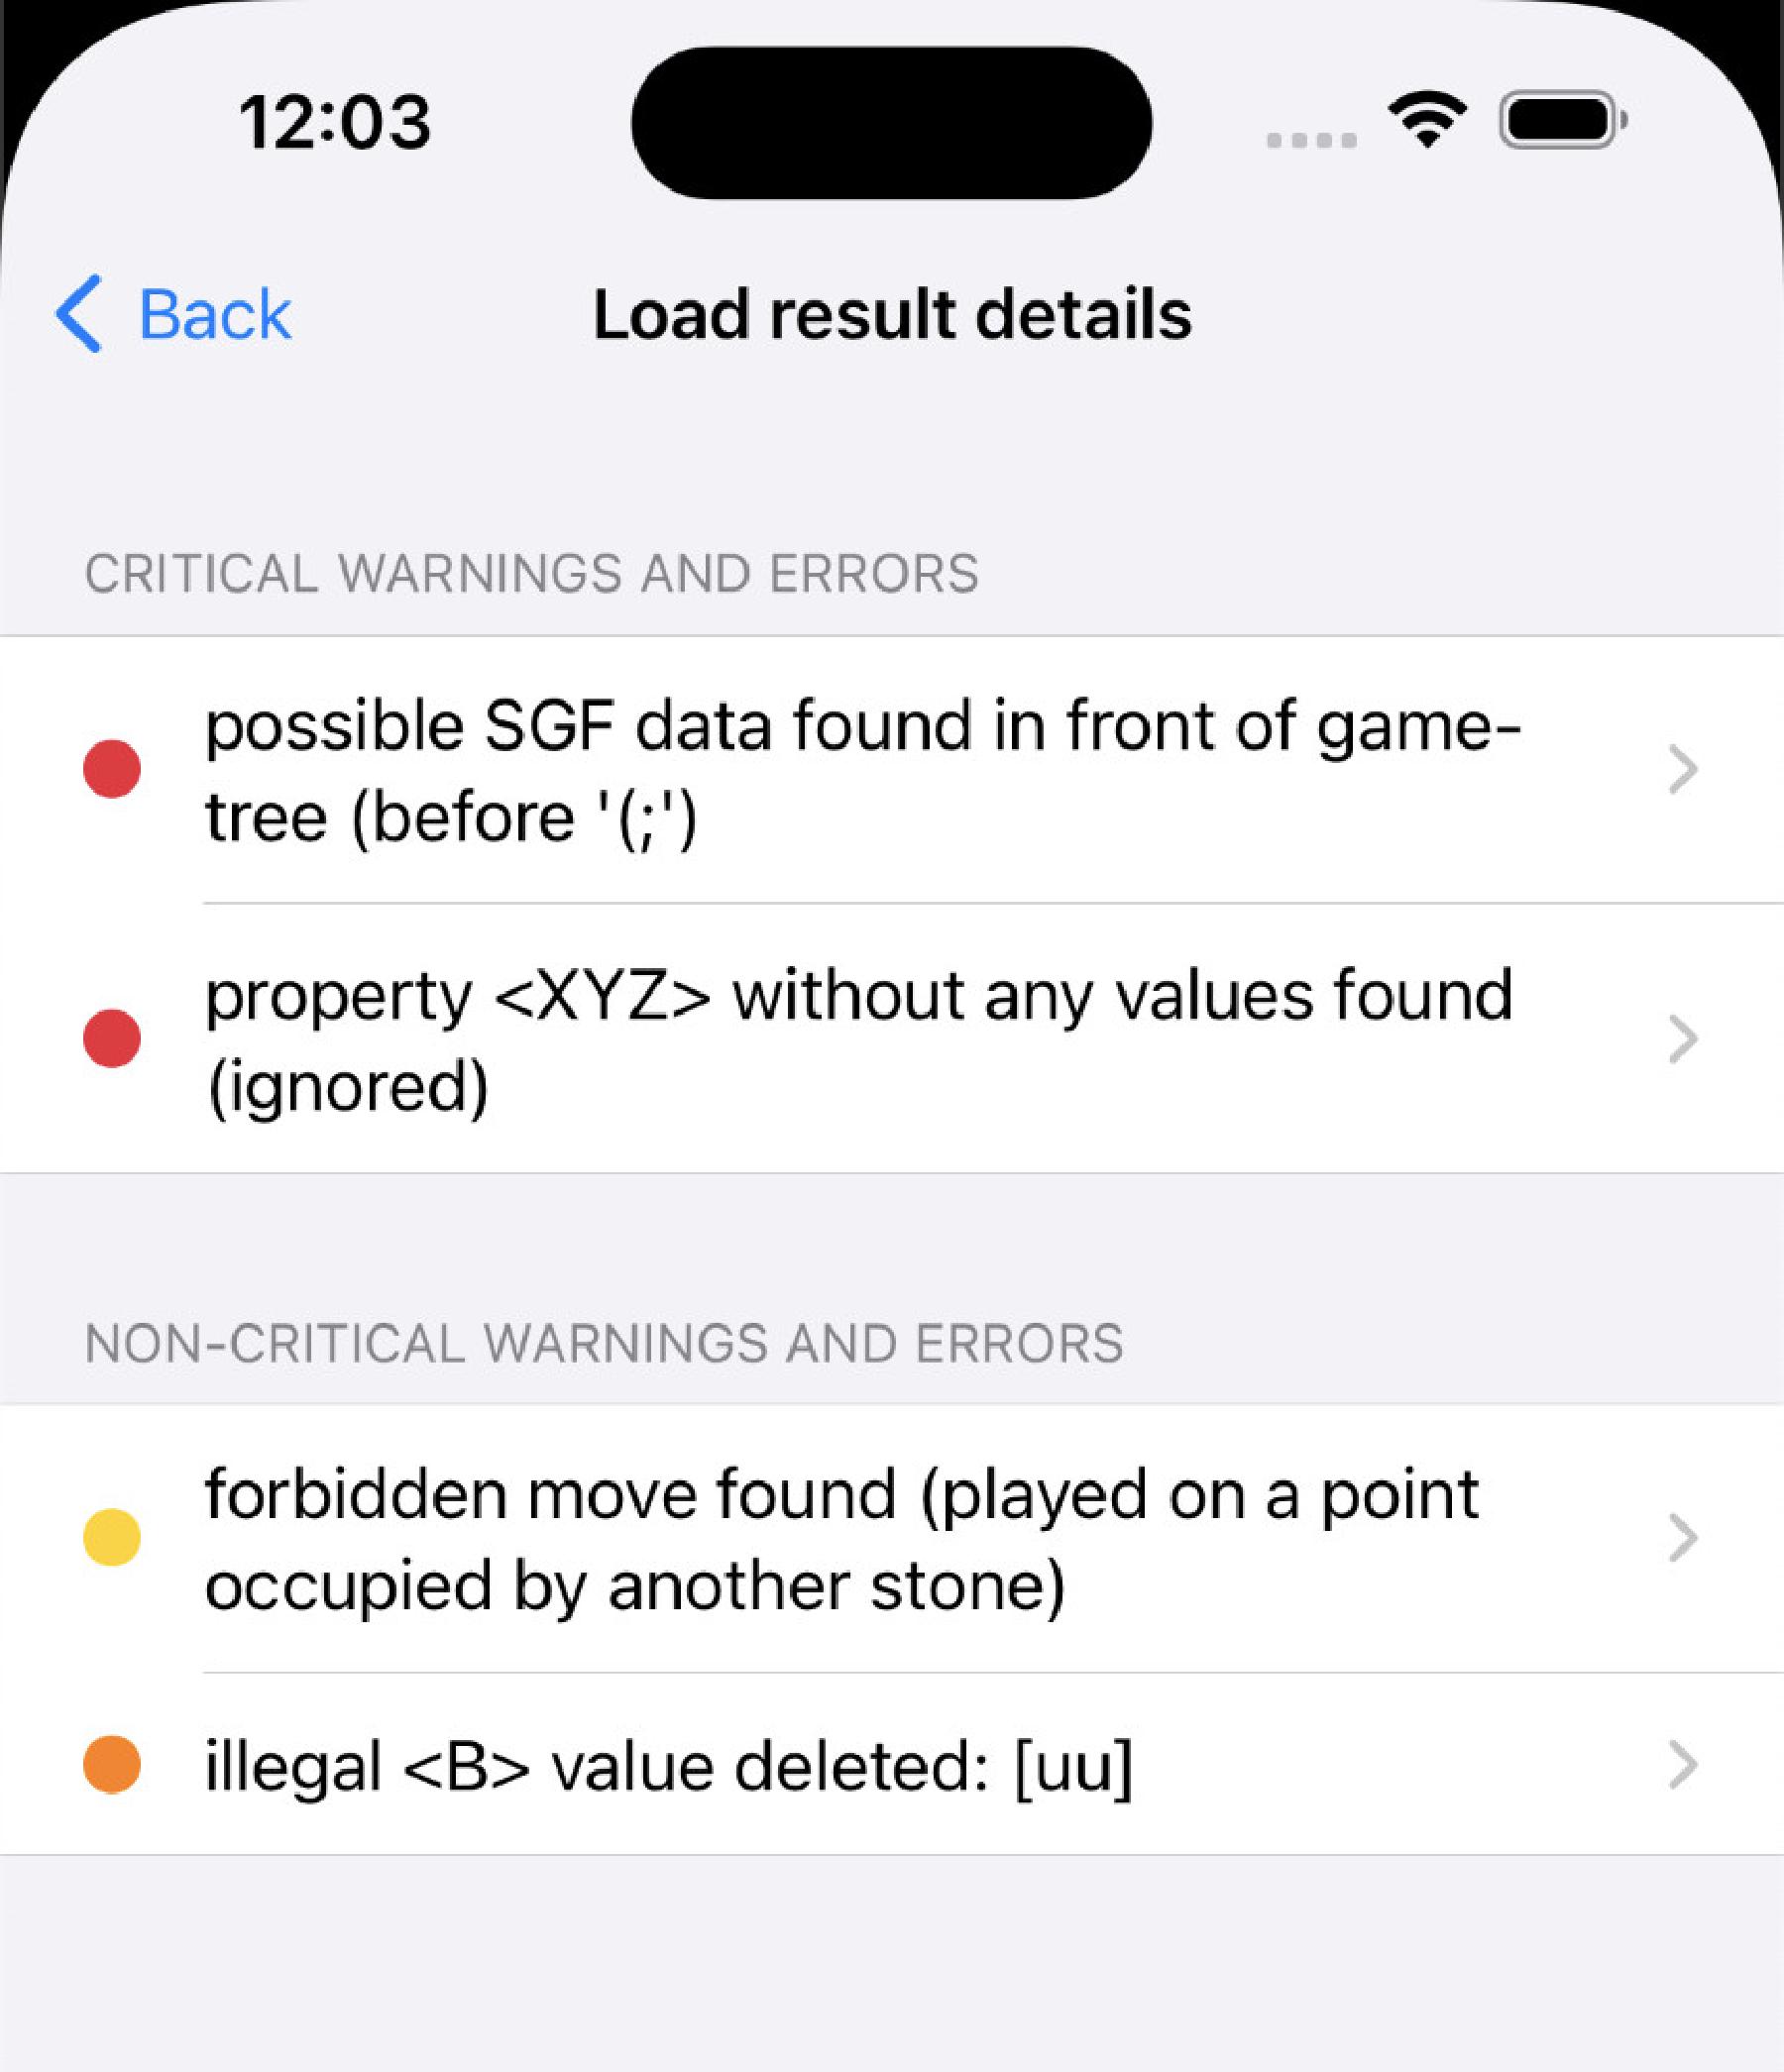 Load result details, listing all messages generated by SGFC